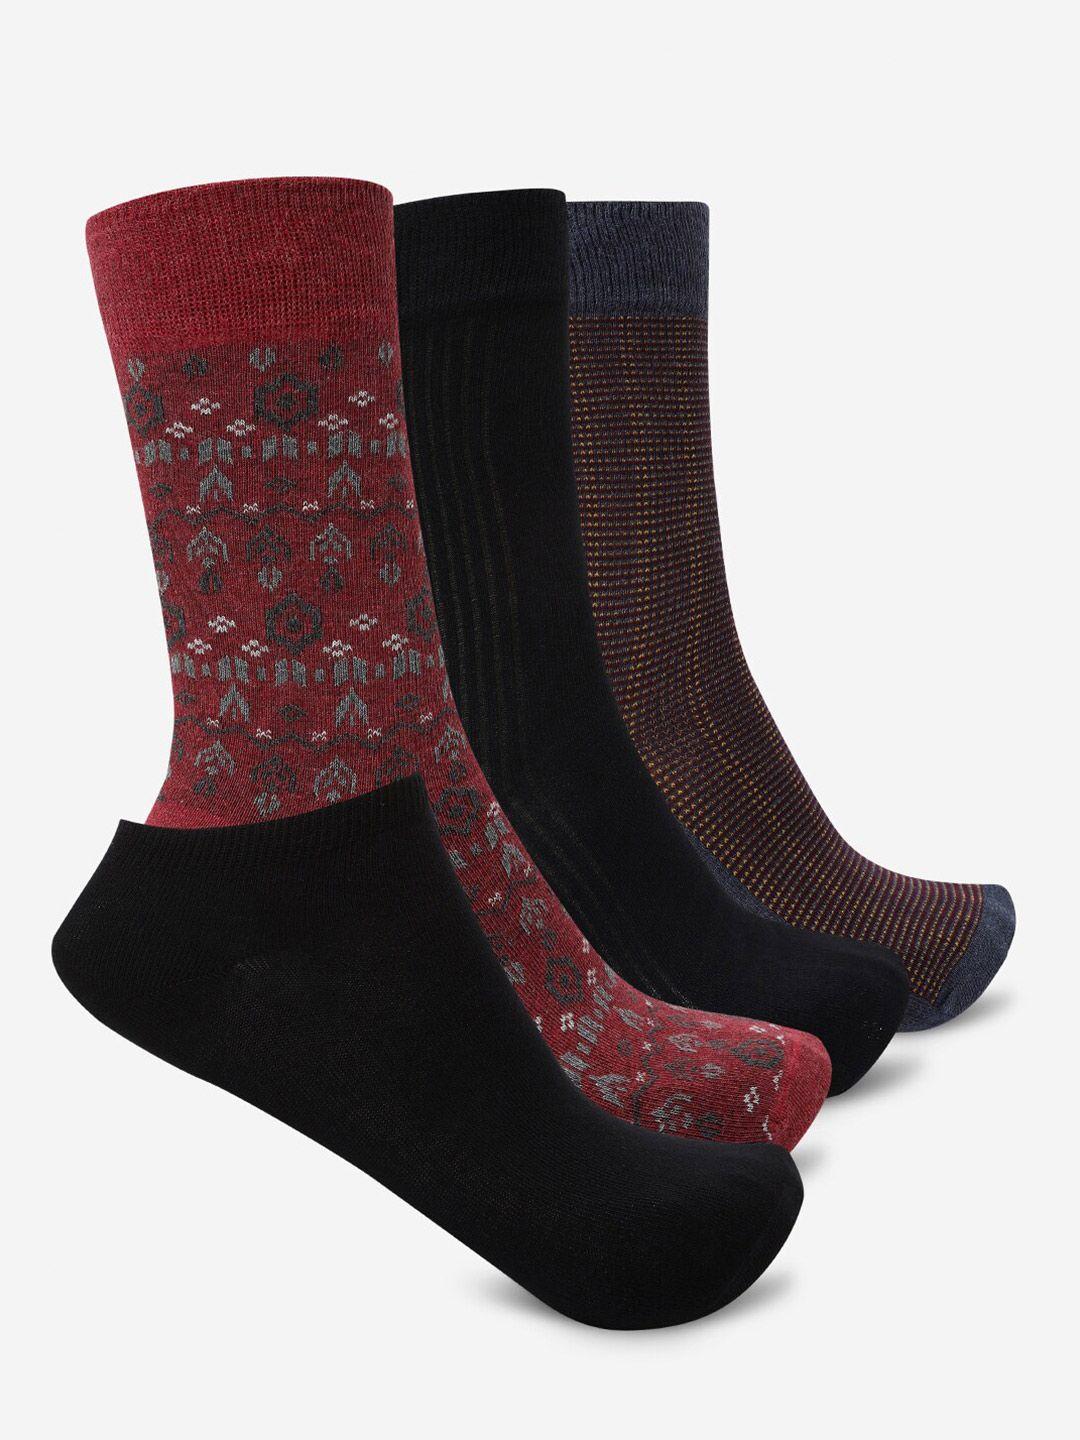 smarty pants unisex pack of 4 assorted calf-length cotton socks